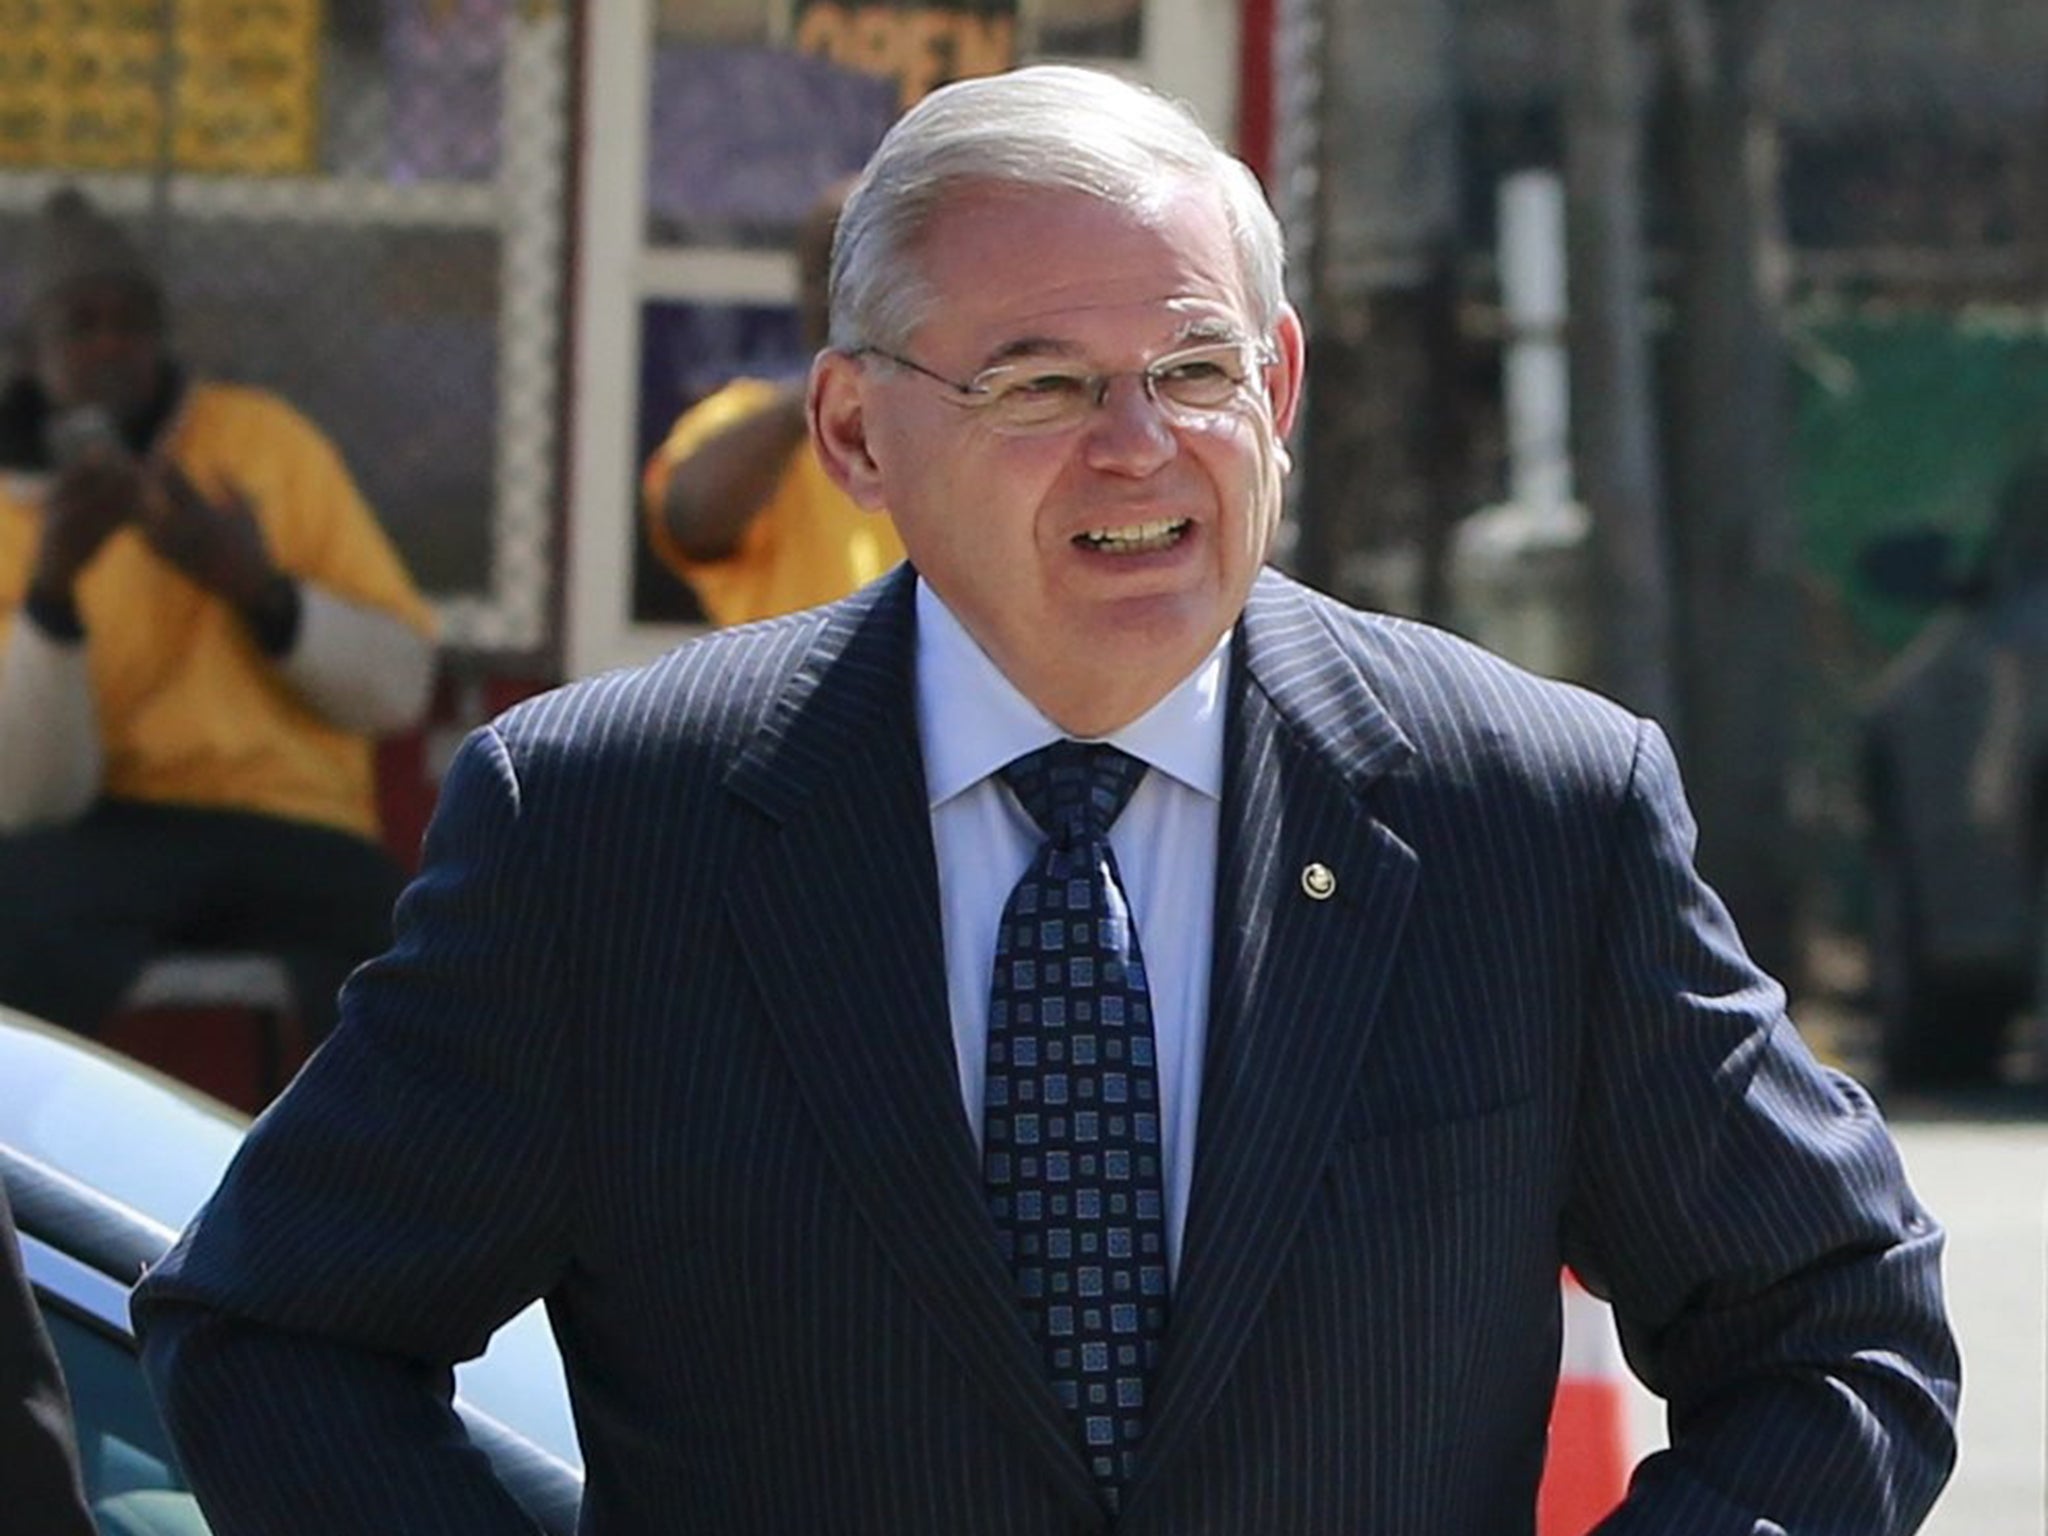 US Senator Robert Menendez arrives at the federal courthouse in Newark, New Jersey